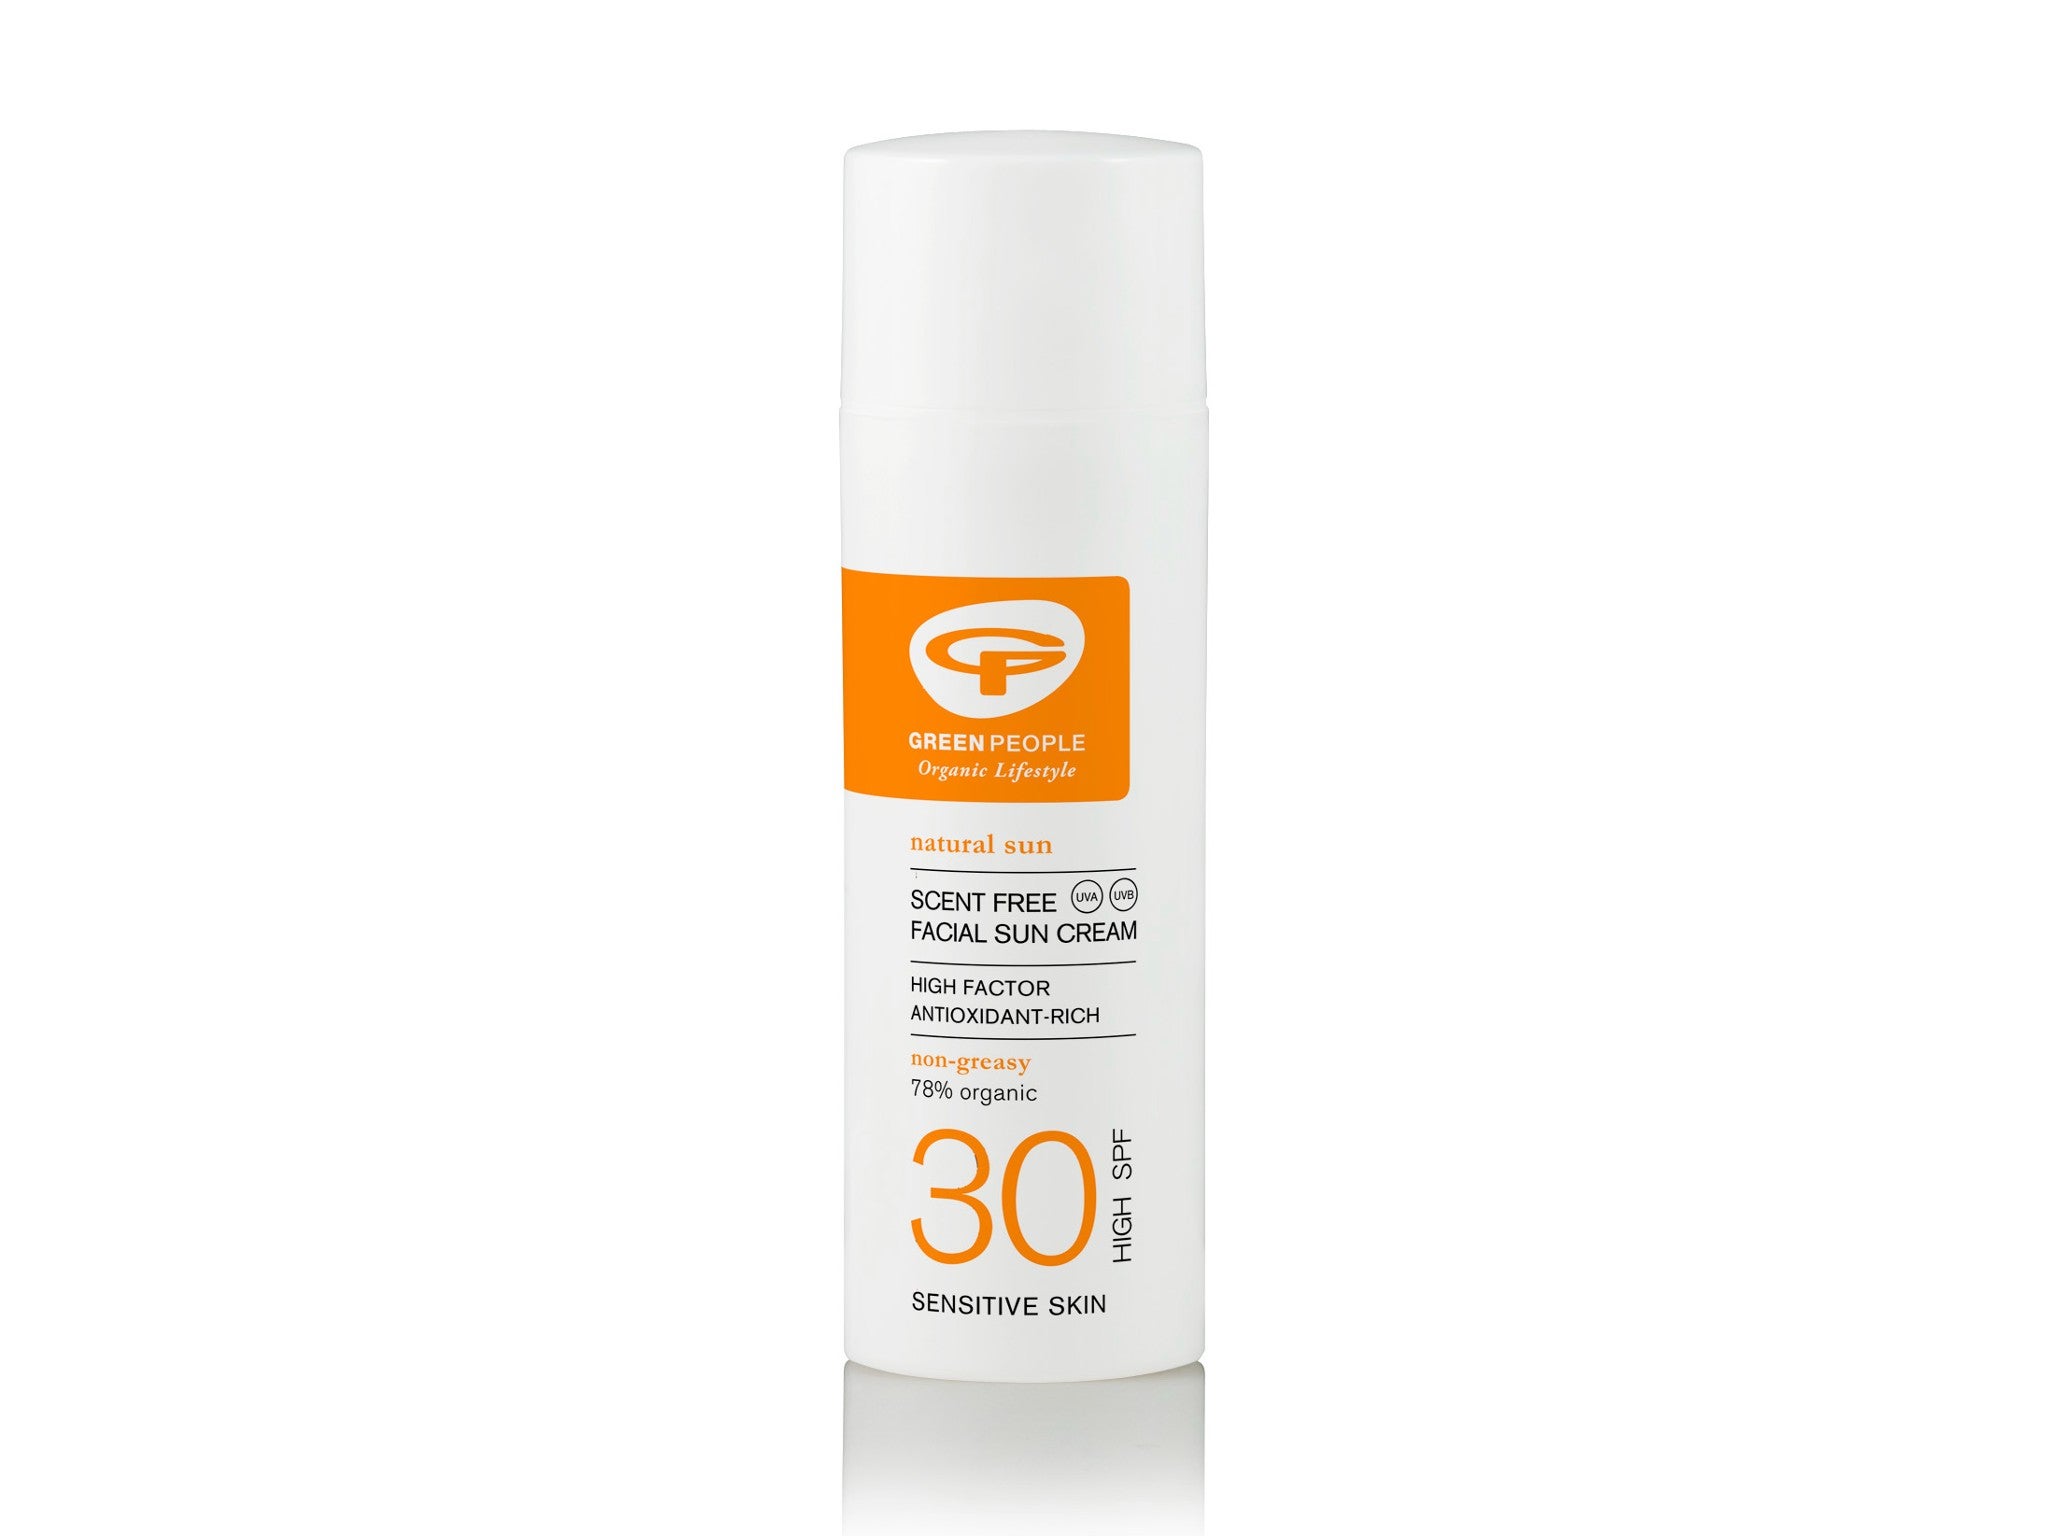 Green People scent free facial sun cream SPF30 indybest